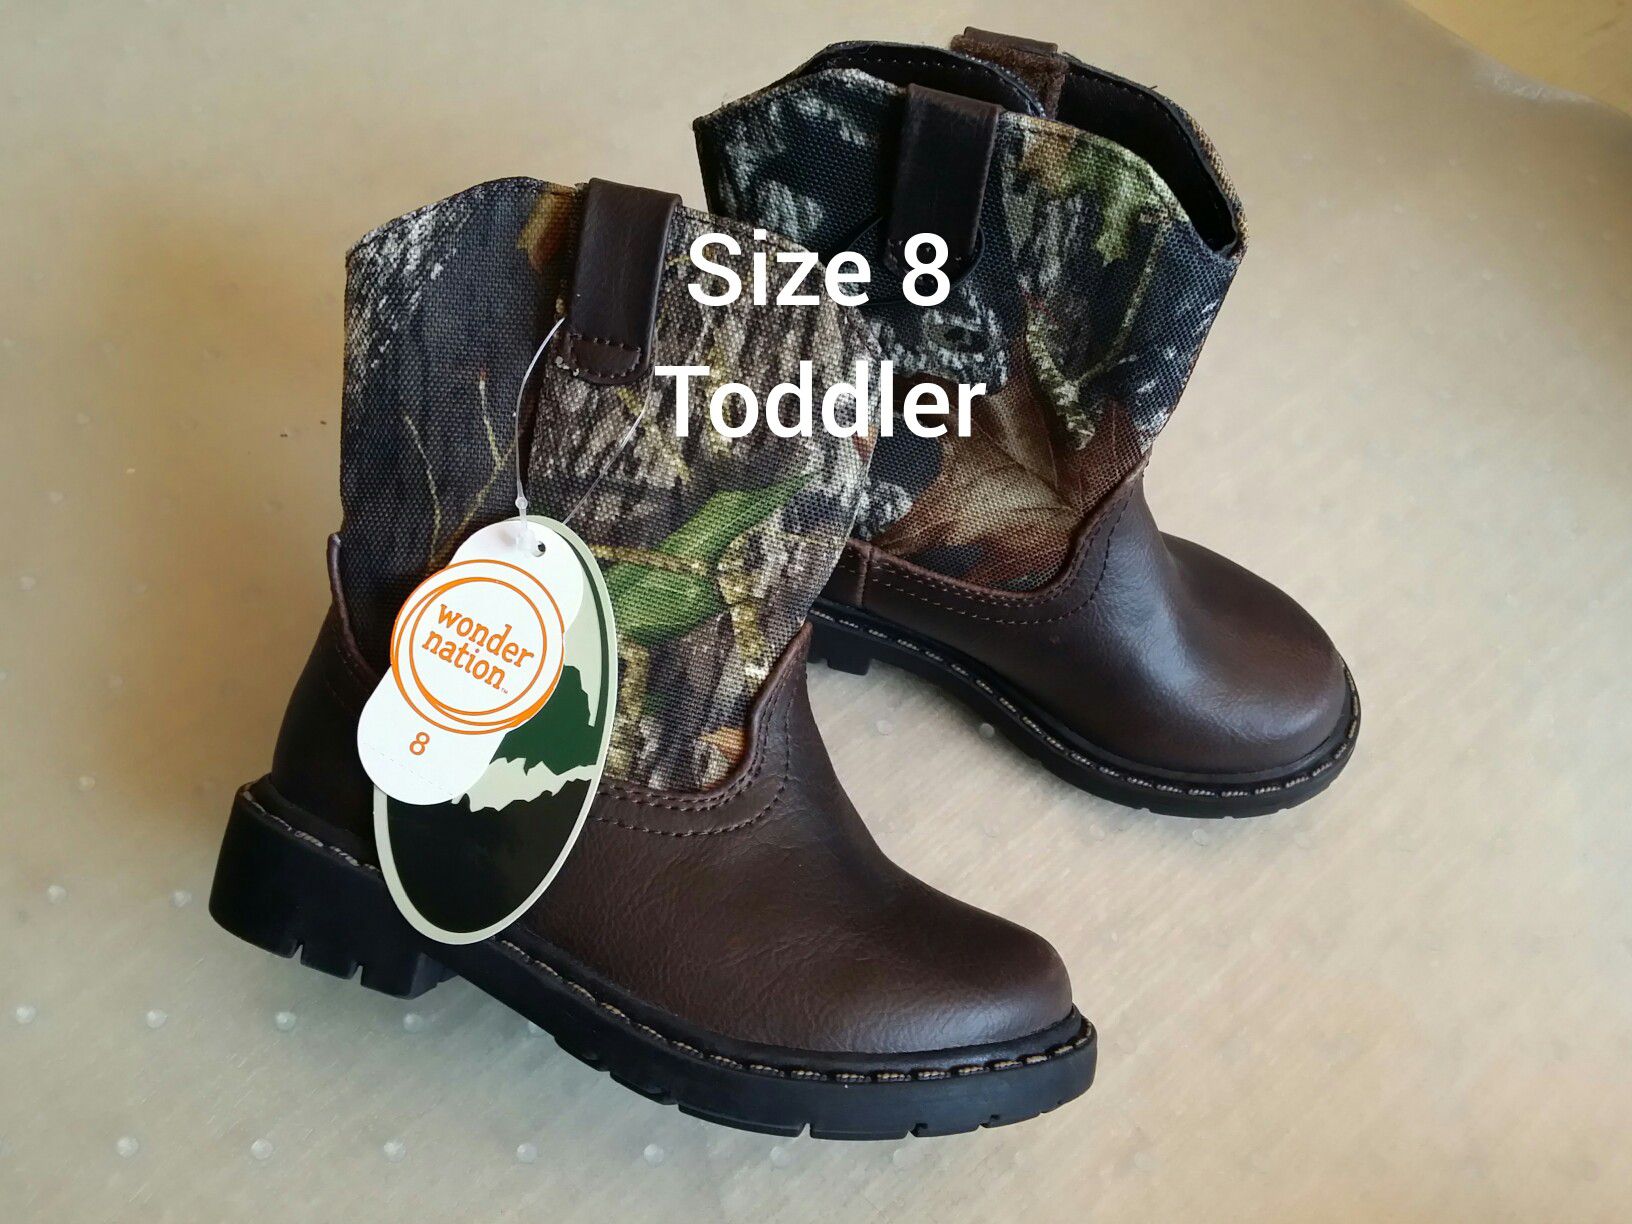 Brand new toddler boots size 8